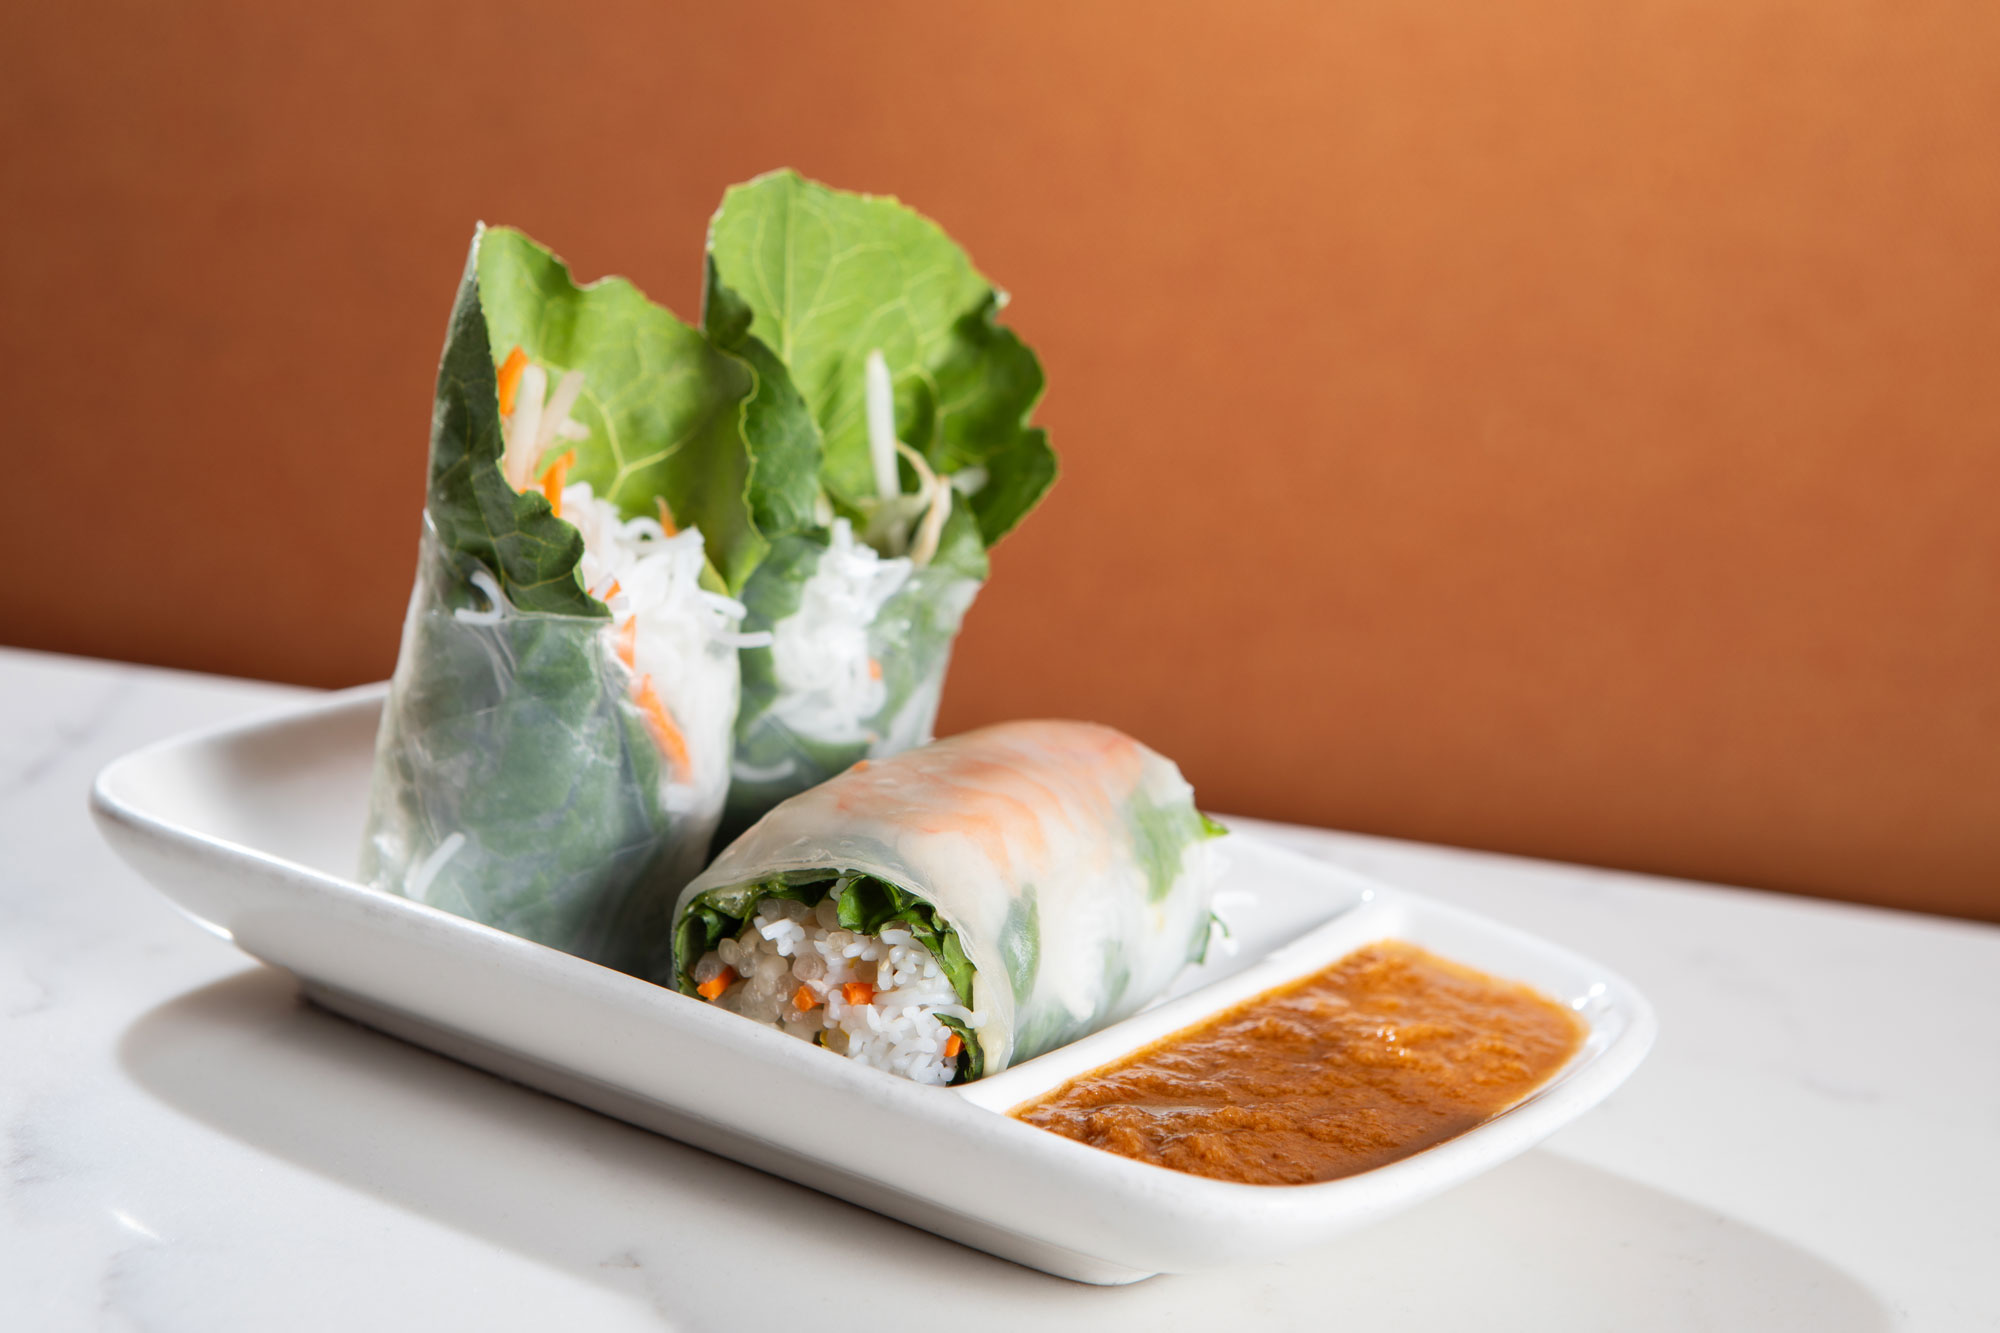 SEA Bambuza Plated Food (spring rolls with peanut sauce)